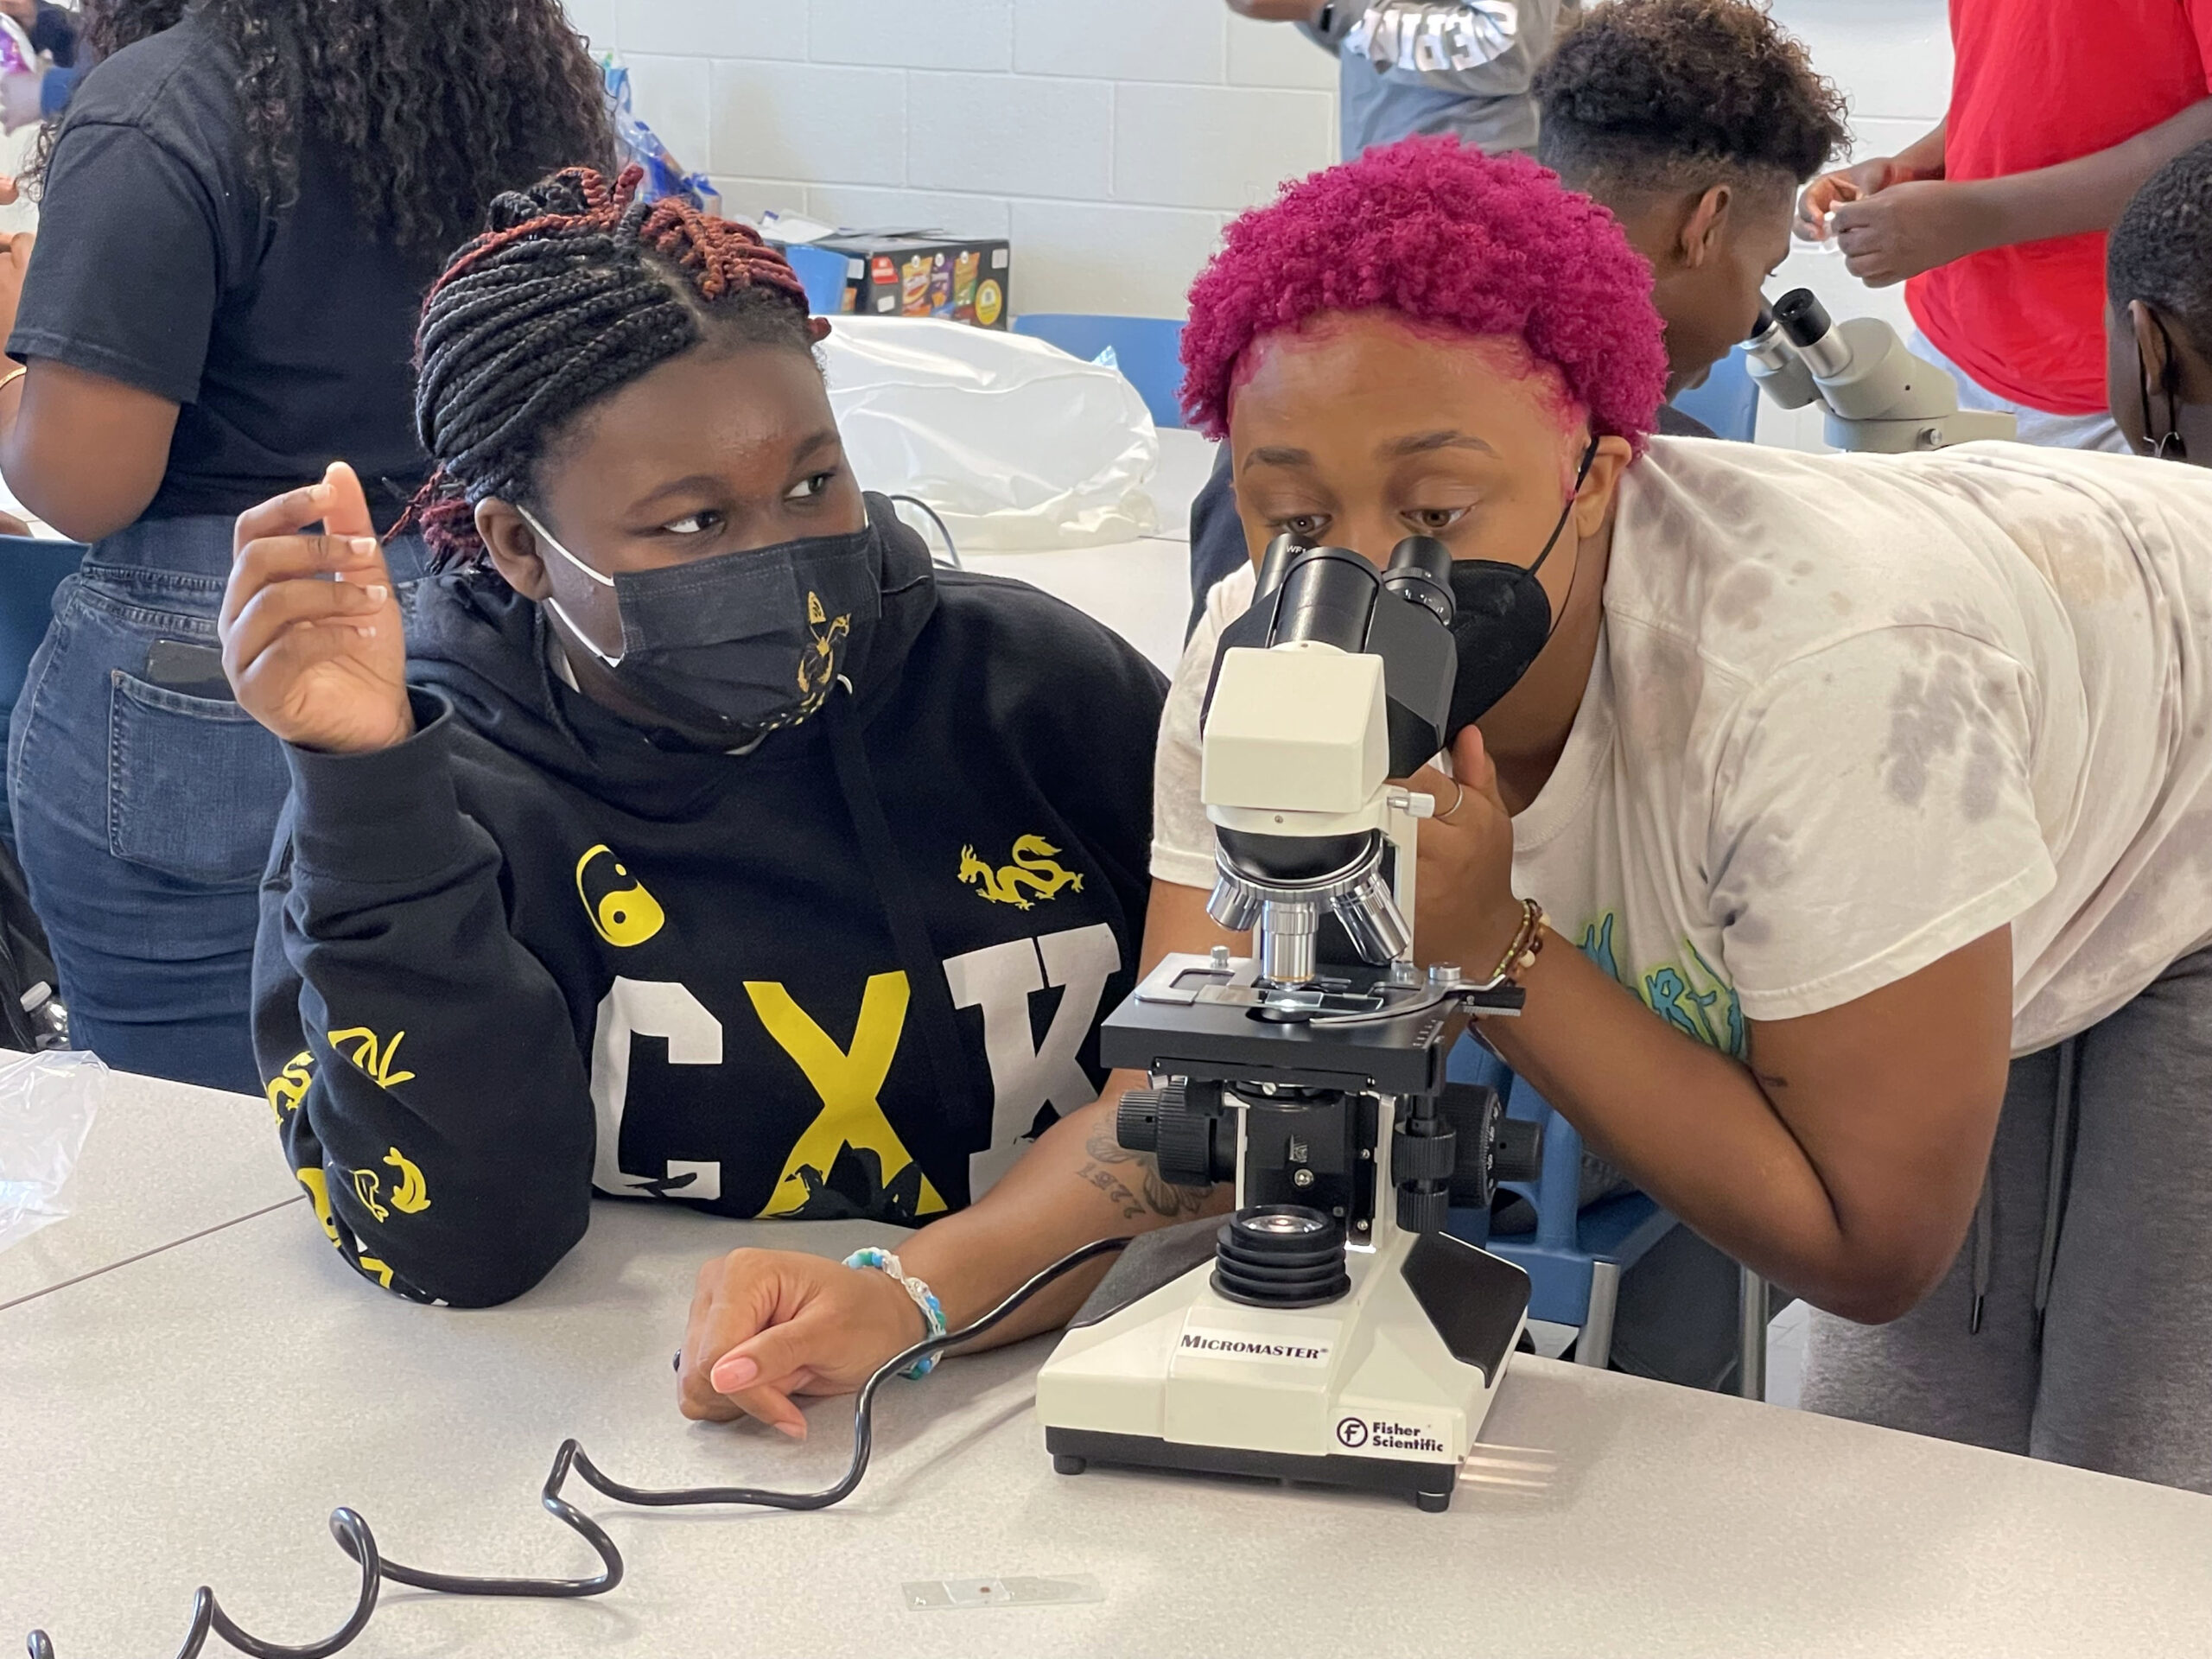 Two students crowd around a microscope. The student on the right is looking through the lens while the student on the right watches on